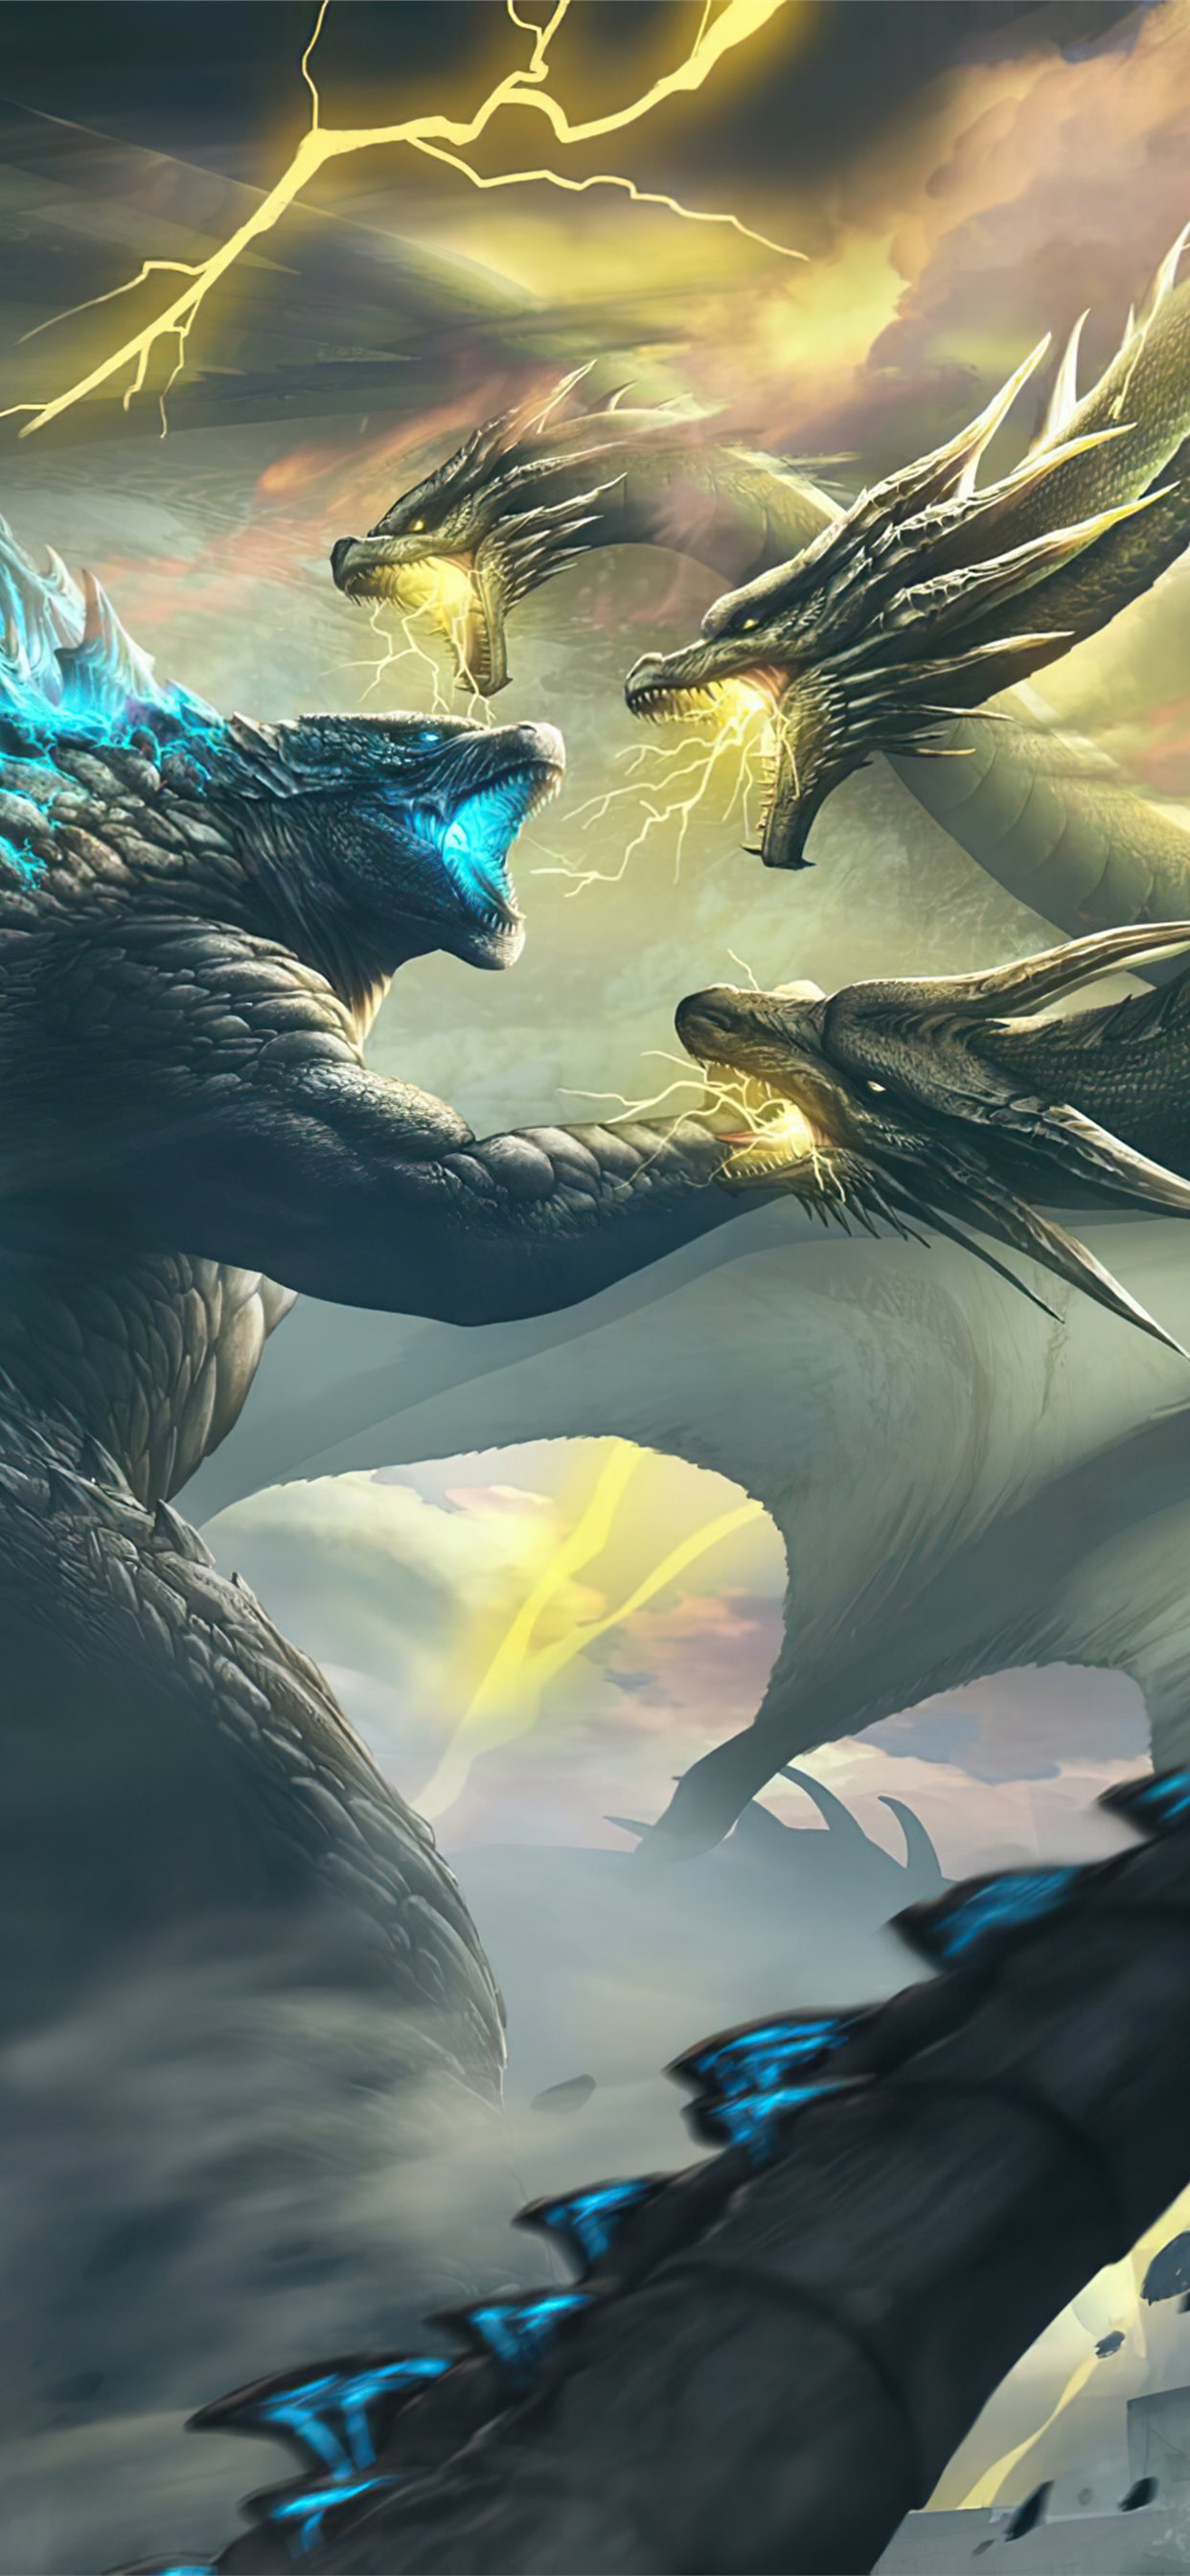 Ghidorah godzilla king of the monsters k iphone wallpapers free download